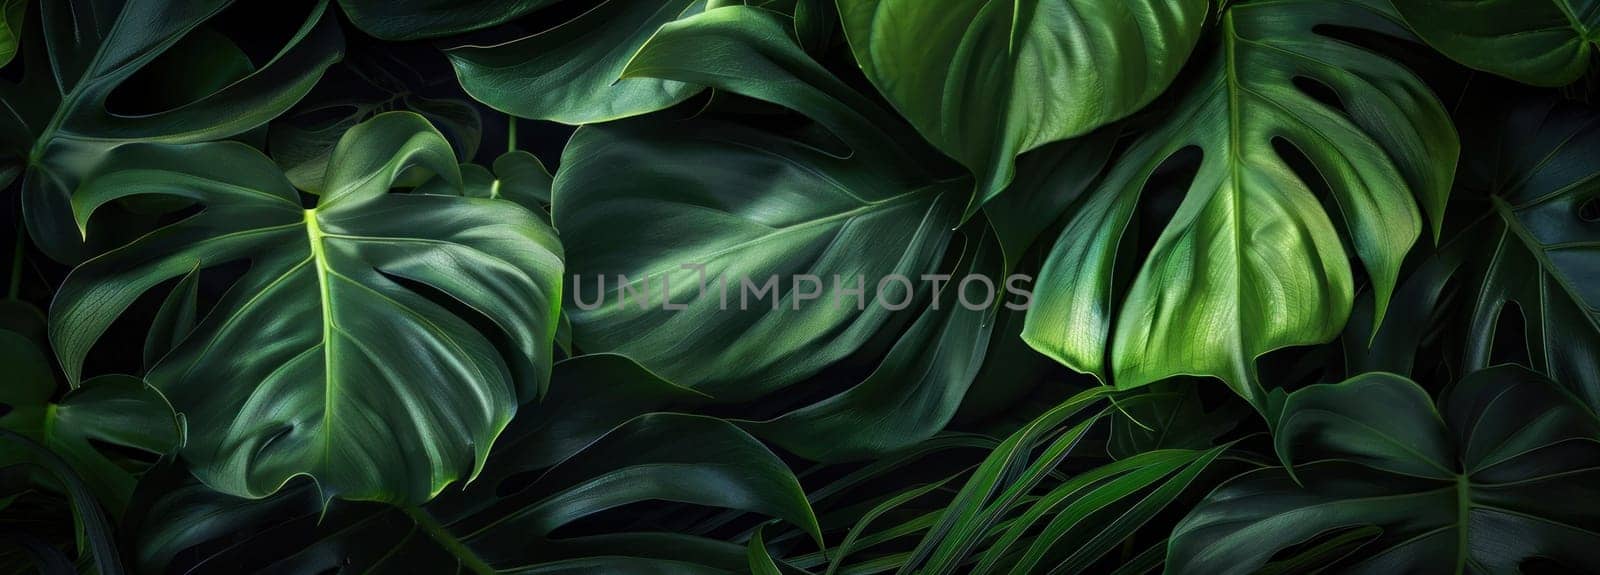 Tropical plants in dark green on black background exotic nature beauty and elegance artistic painting by Vichizh